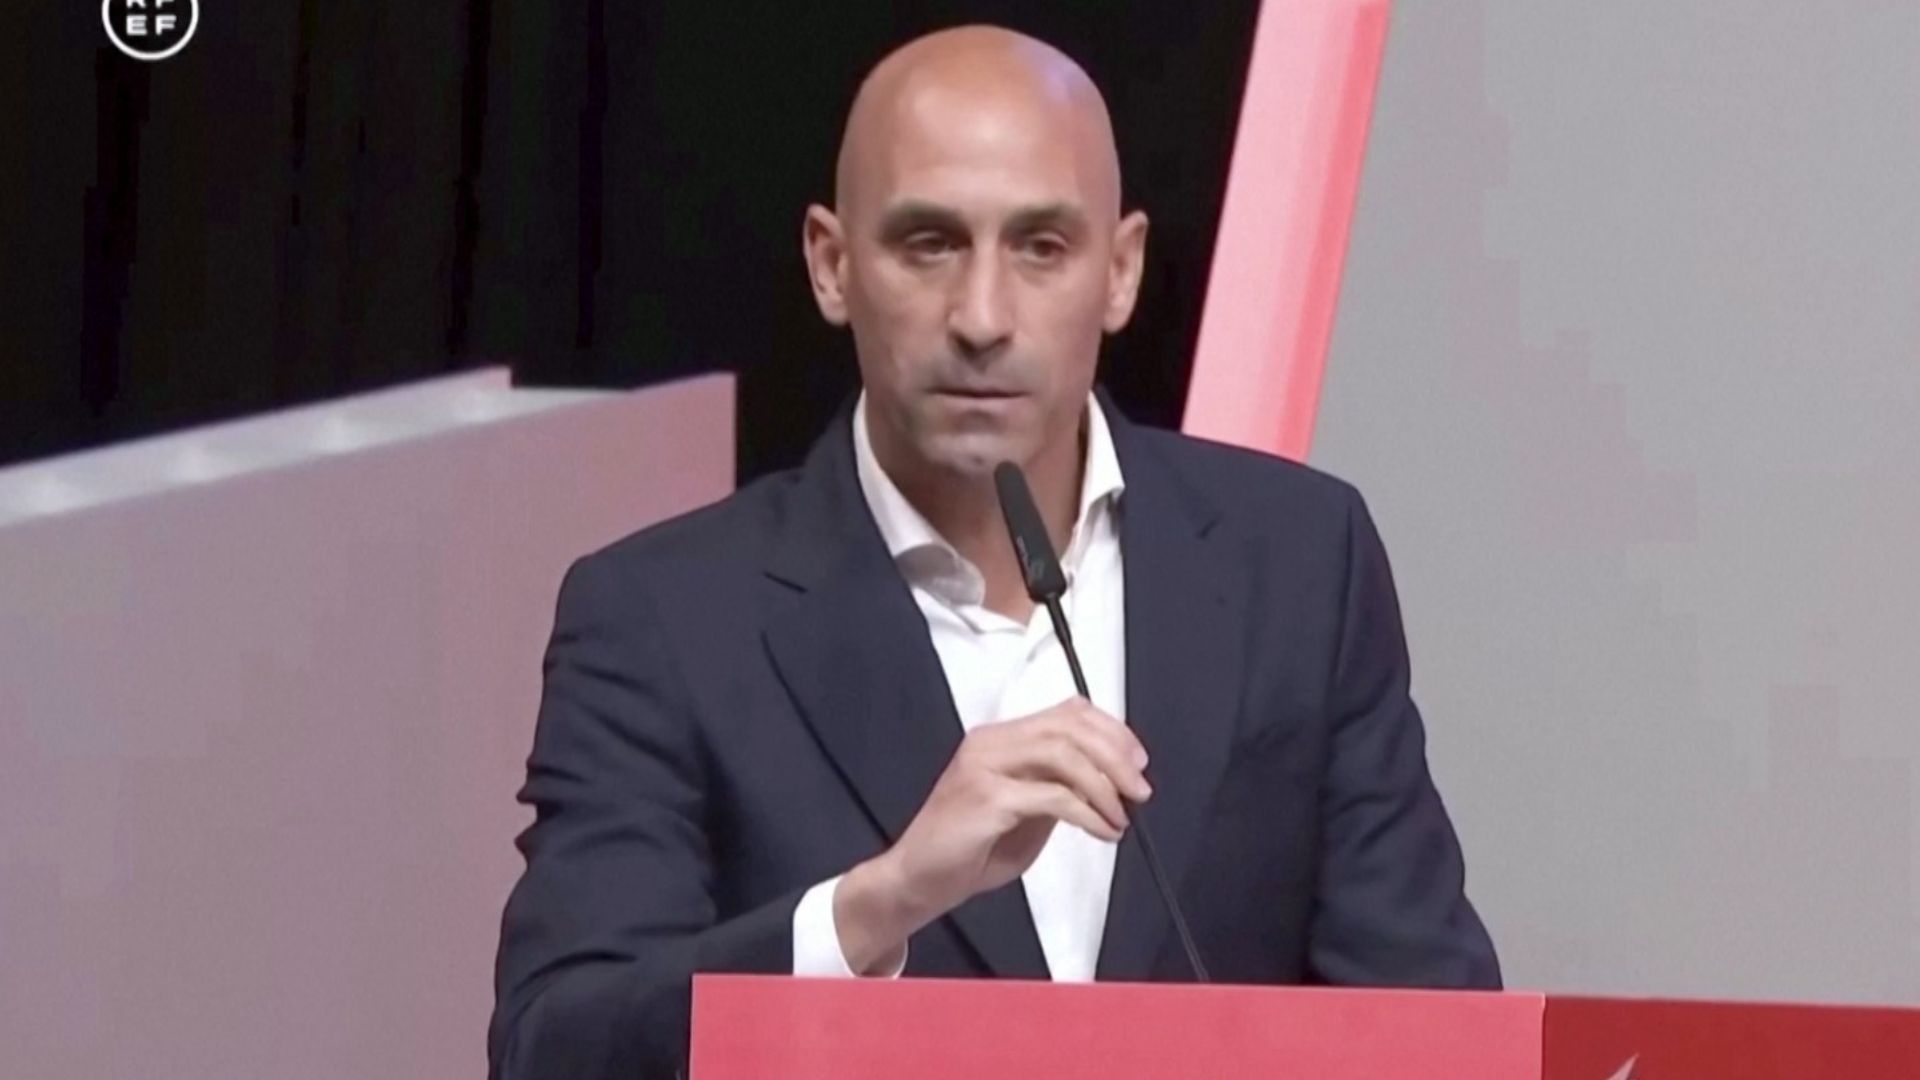 Luis Rubiales has been suspended by FIFA for 90 days. /CGTN